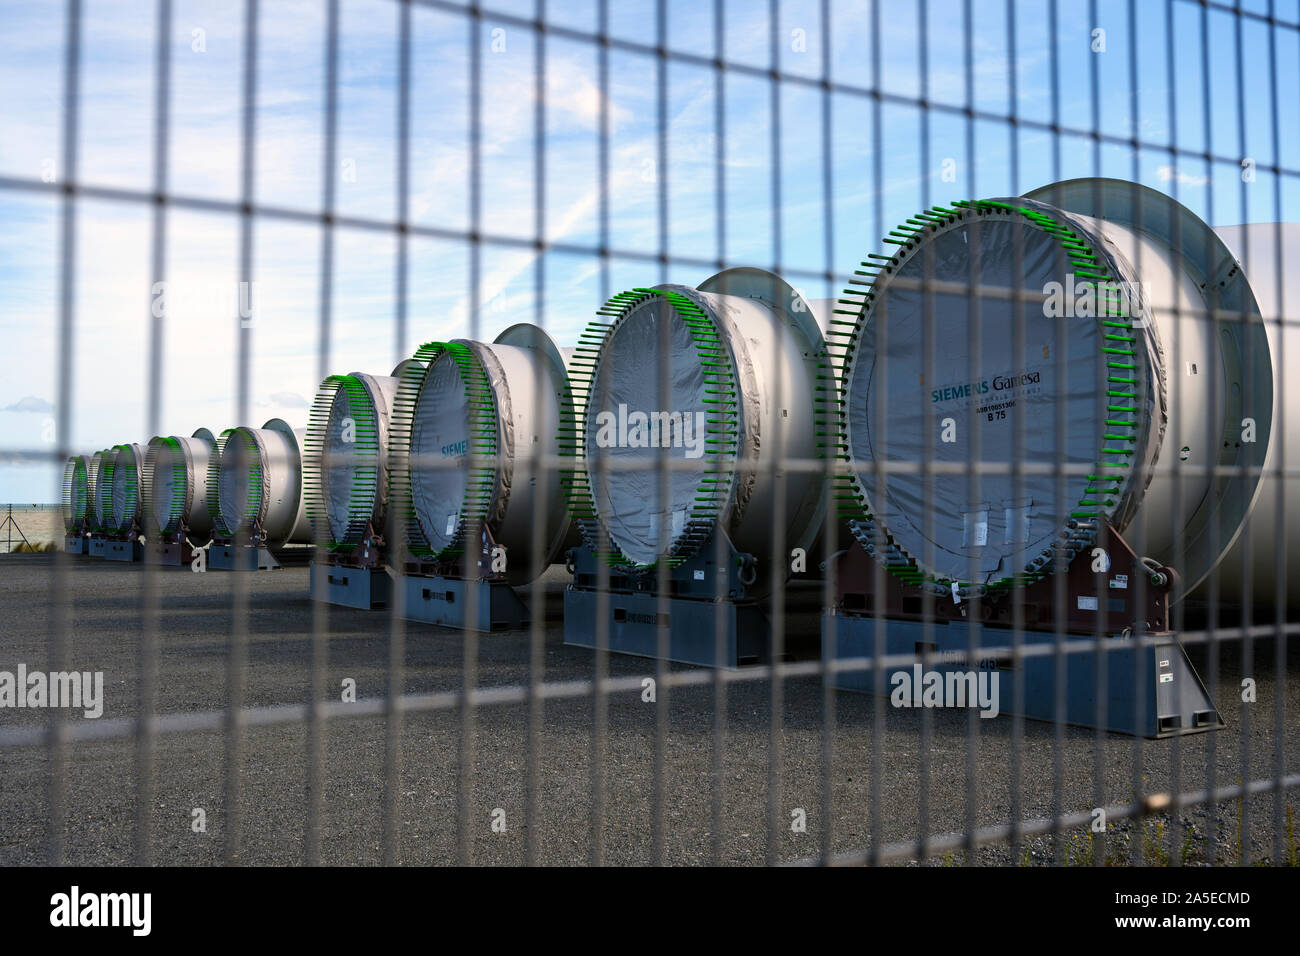 Siemens Gamesa wind turbine blades, outer harbour, Great Yarmouth, Norfolk, UK. Stock Photo